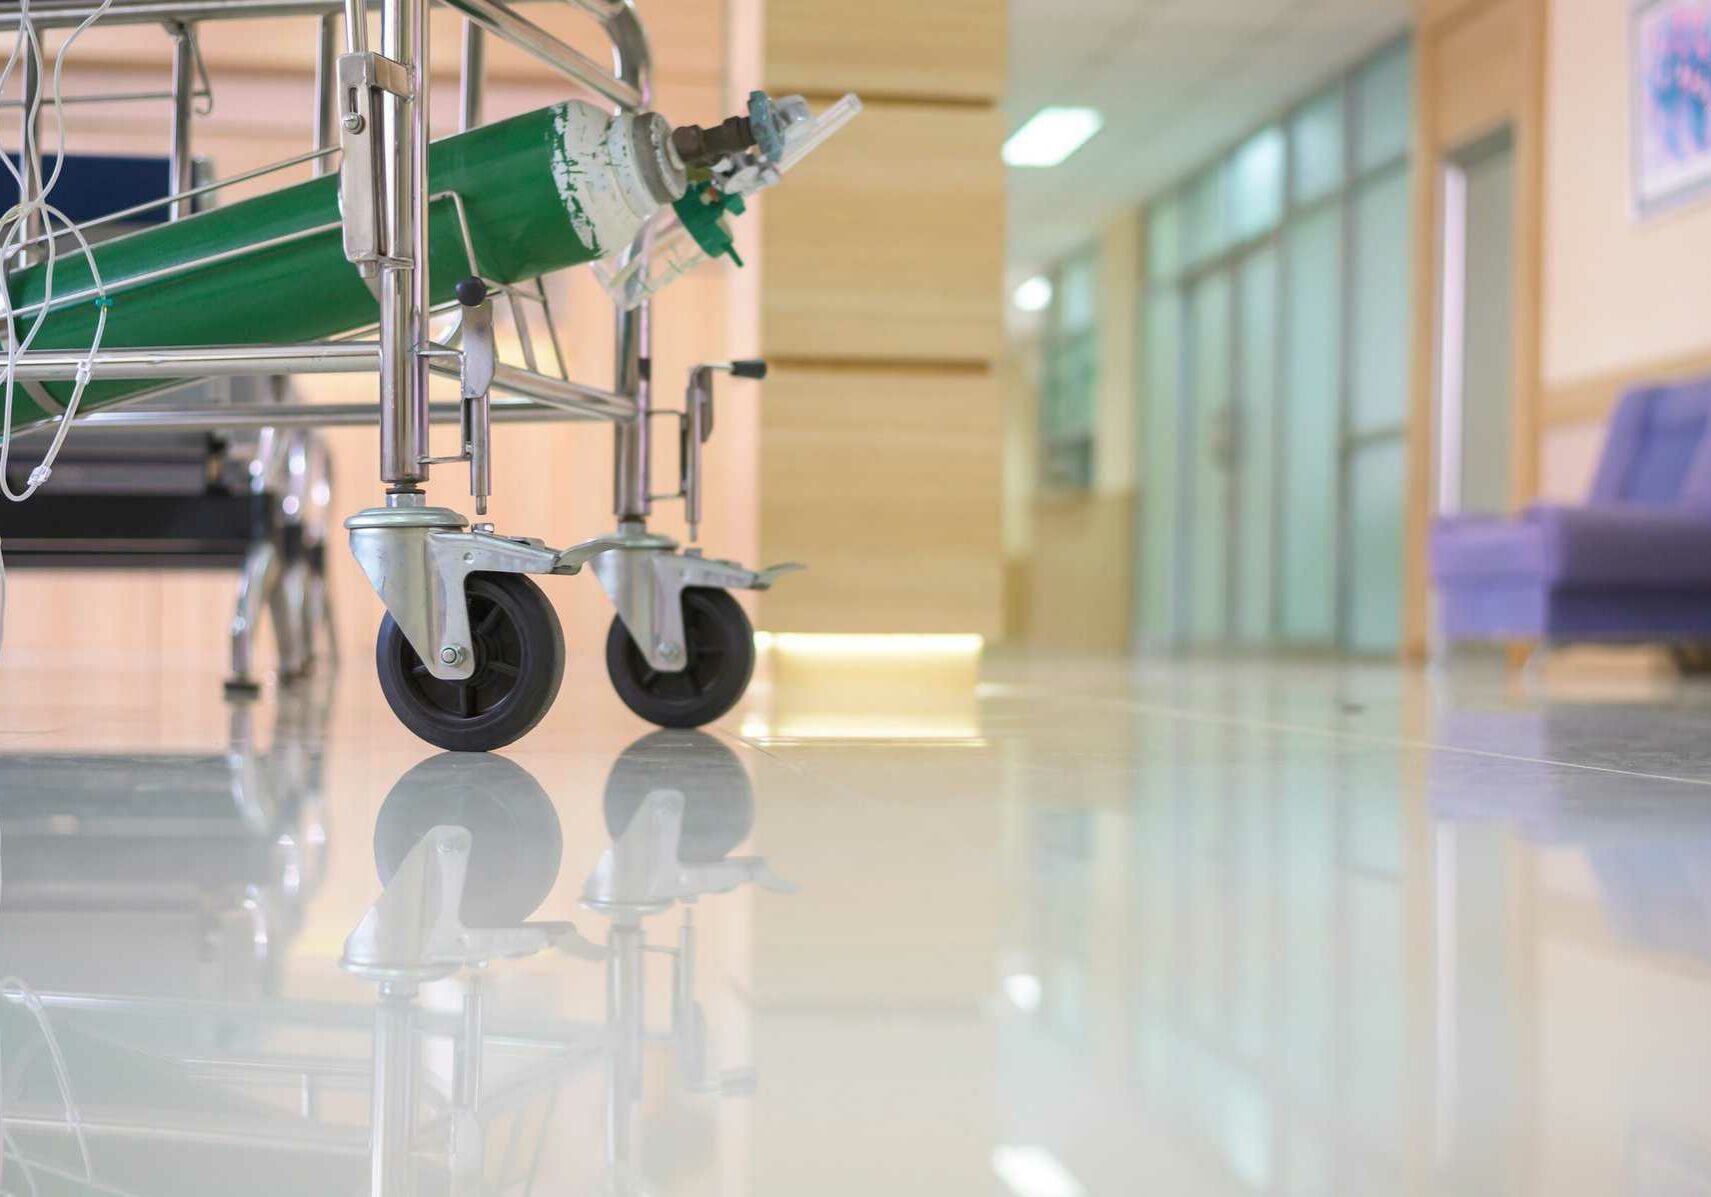 At the hospital corridor, an emergency stretcher with no patient. Stretchers are mostly utilized in hospital settings to transport people who need medical attention.